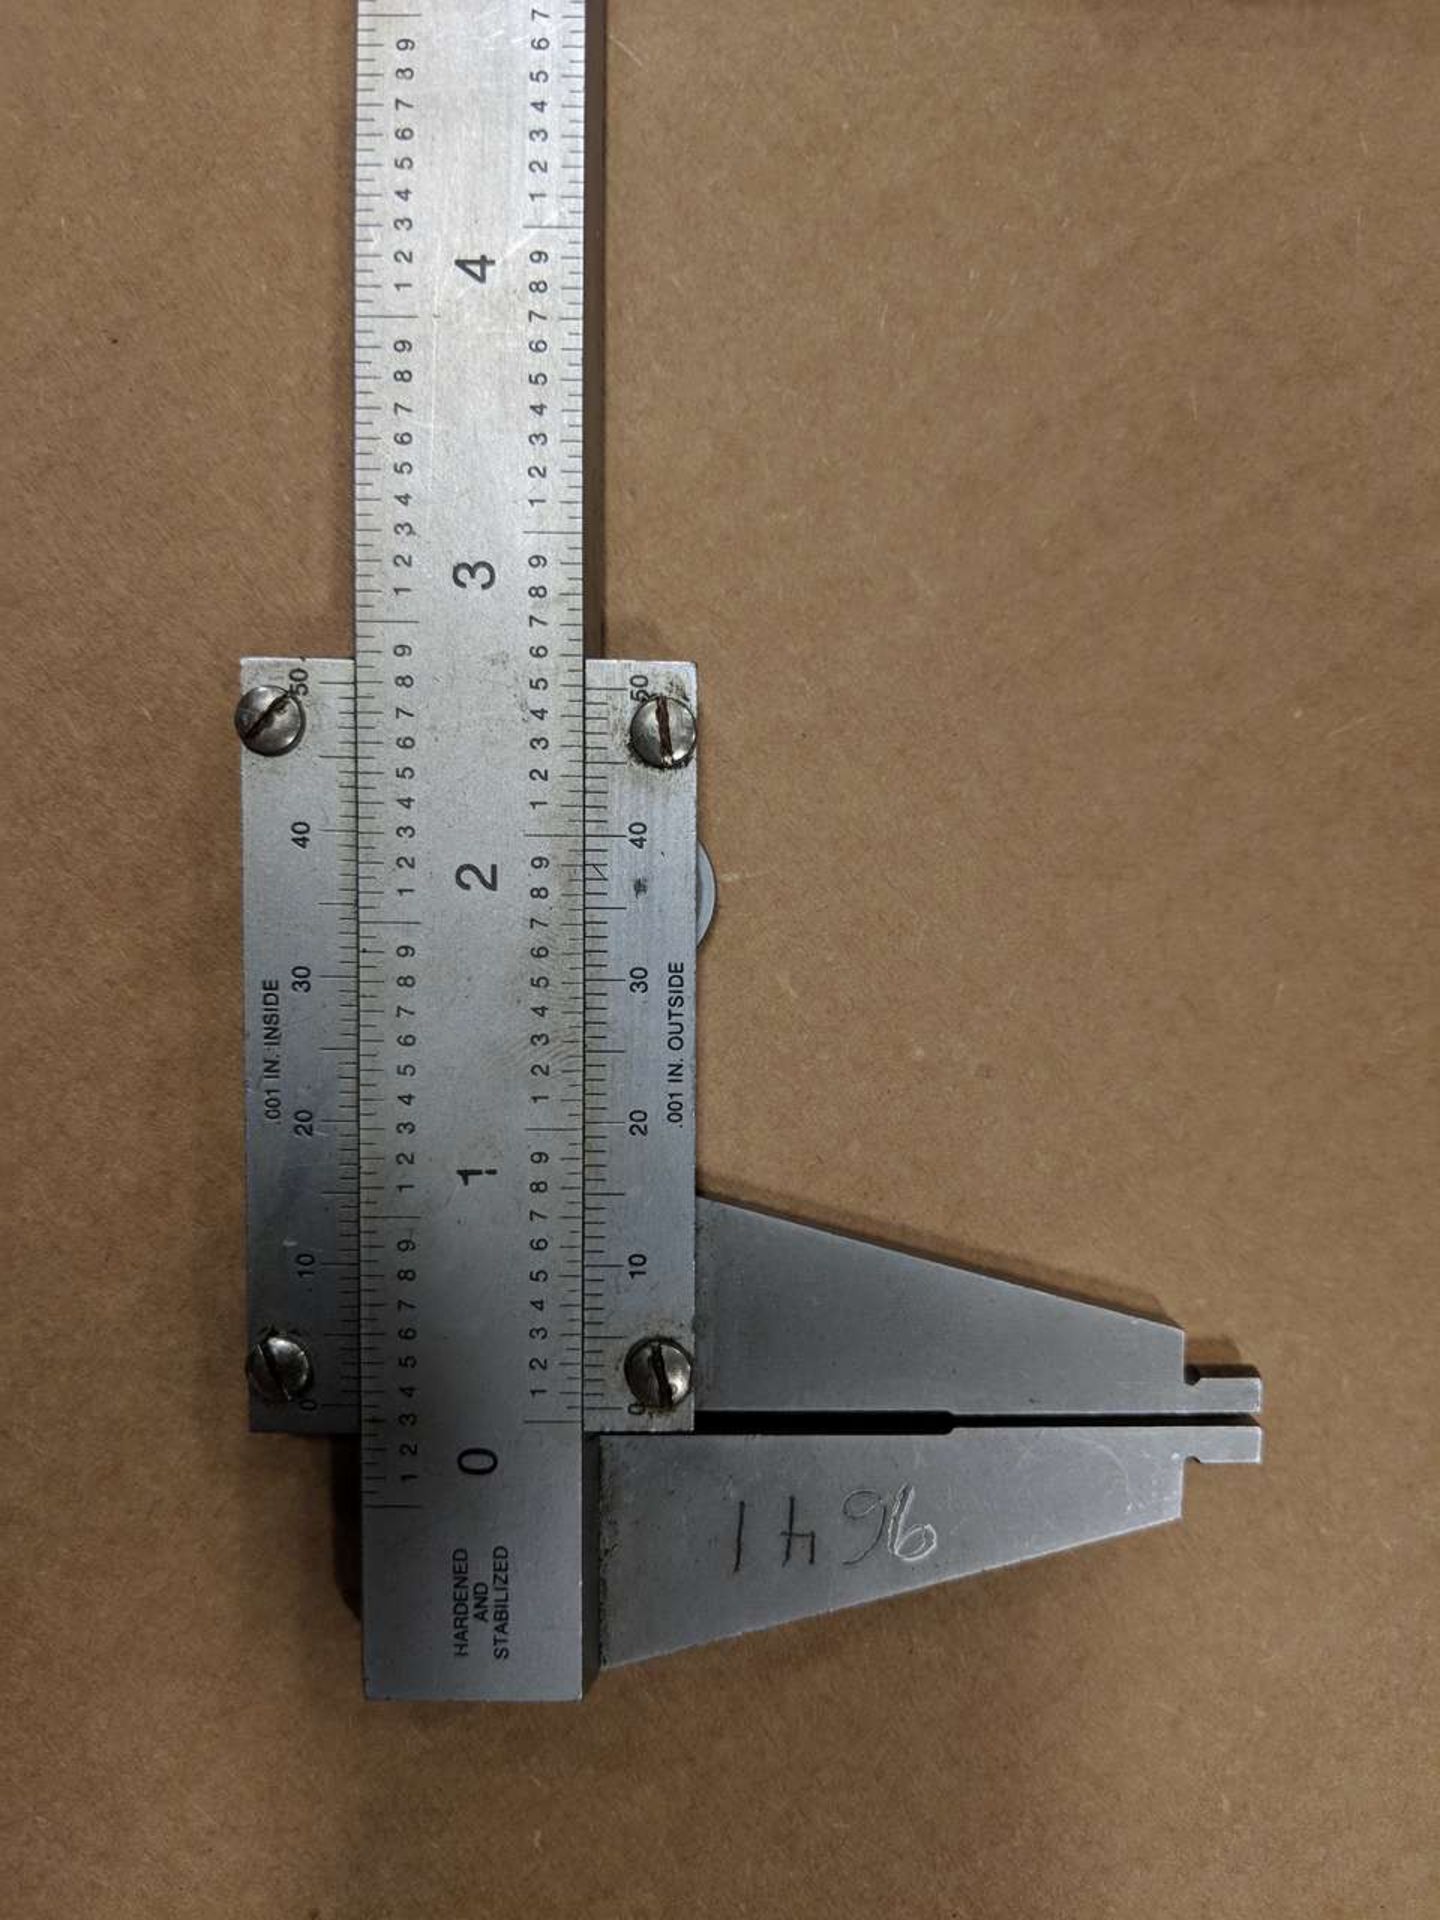 SET OF 2 CALIPERS - Image 3 of 3